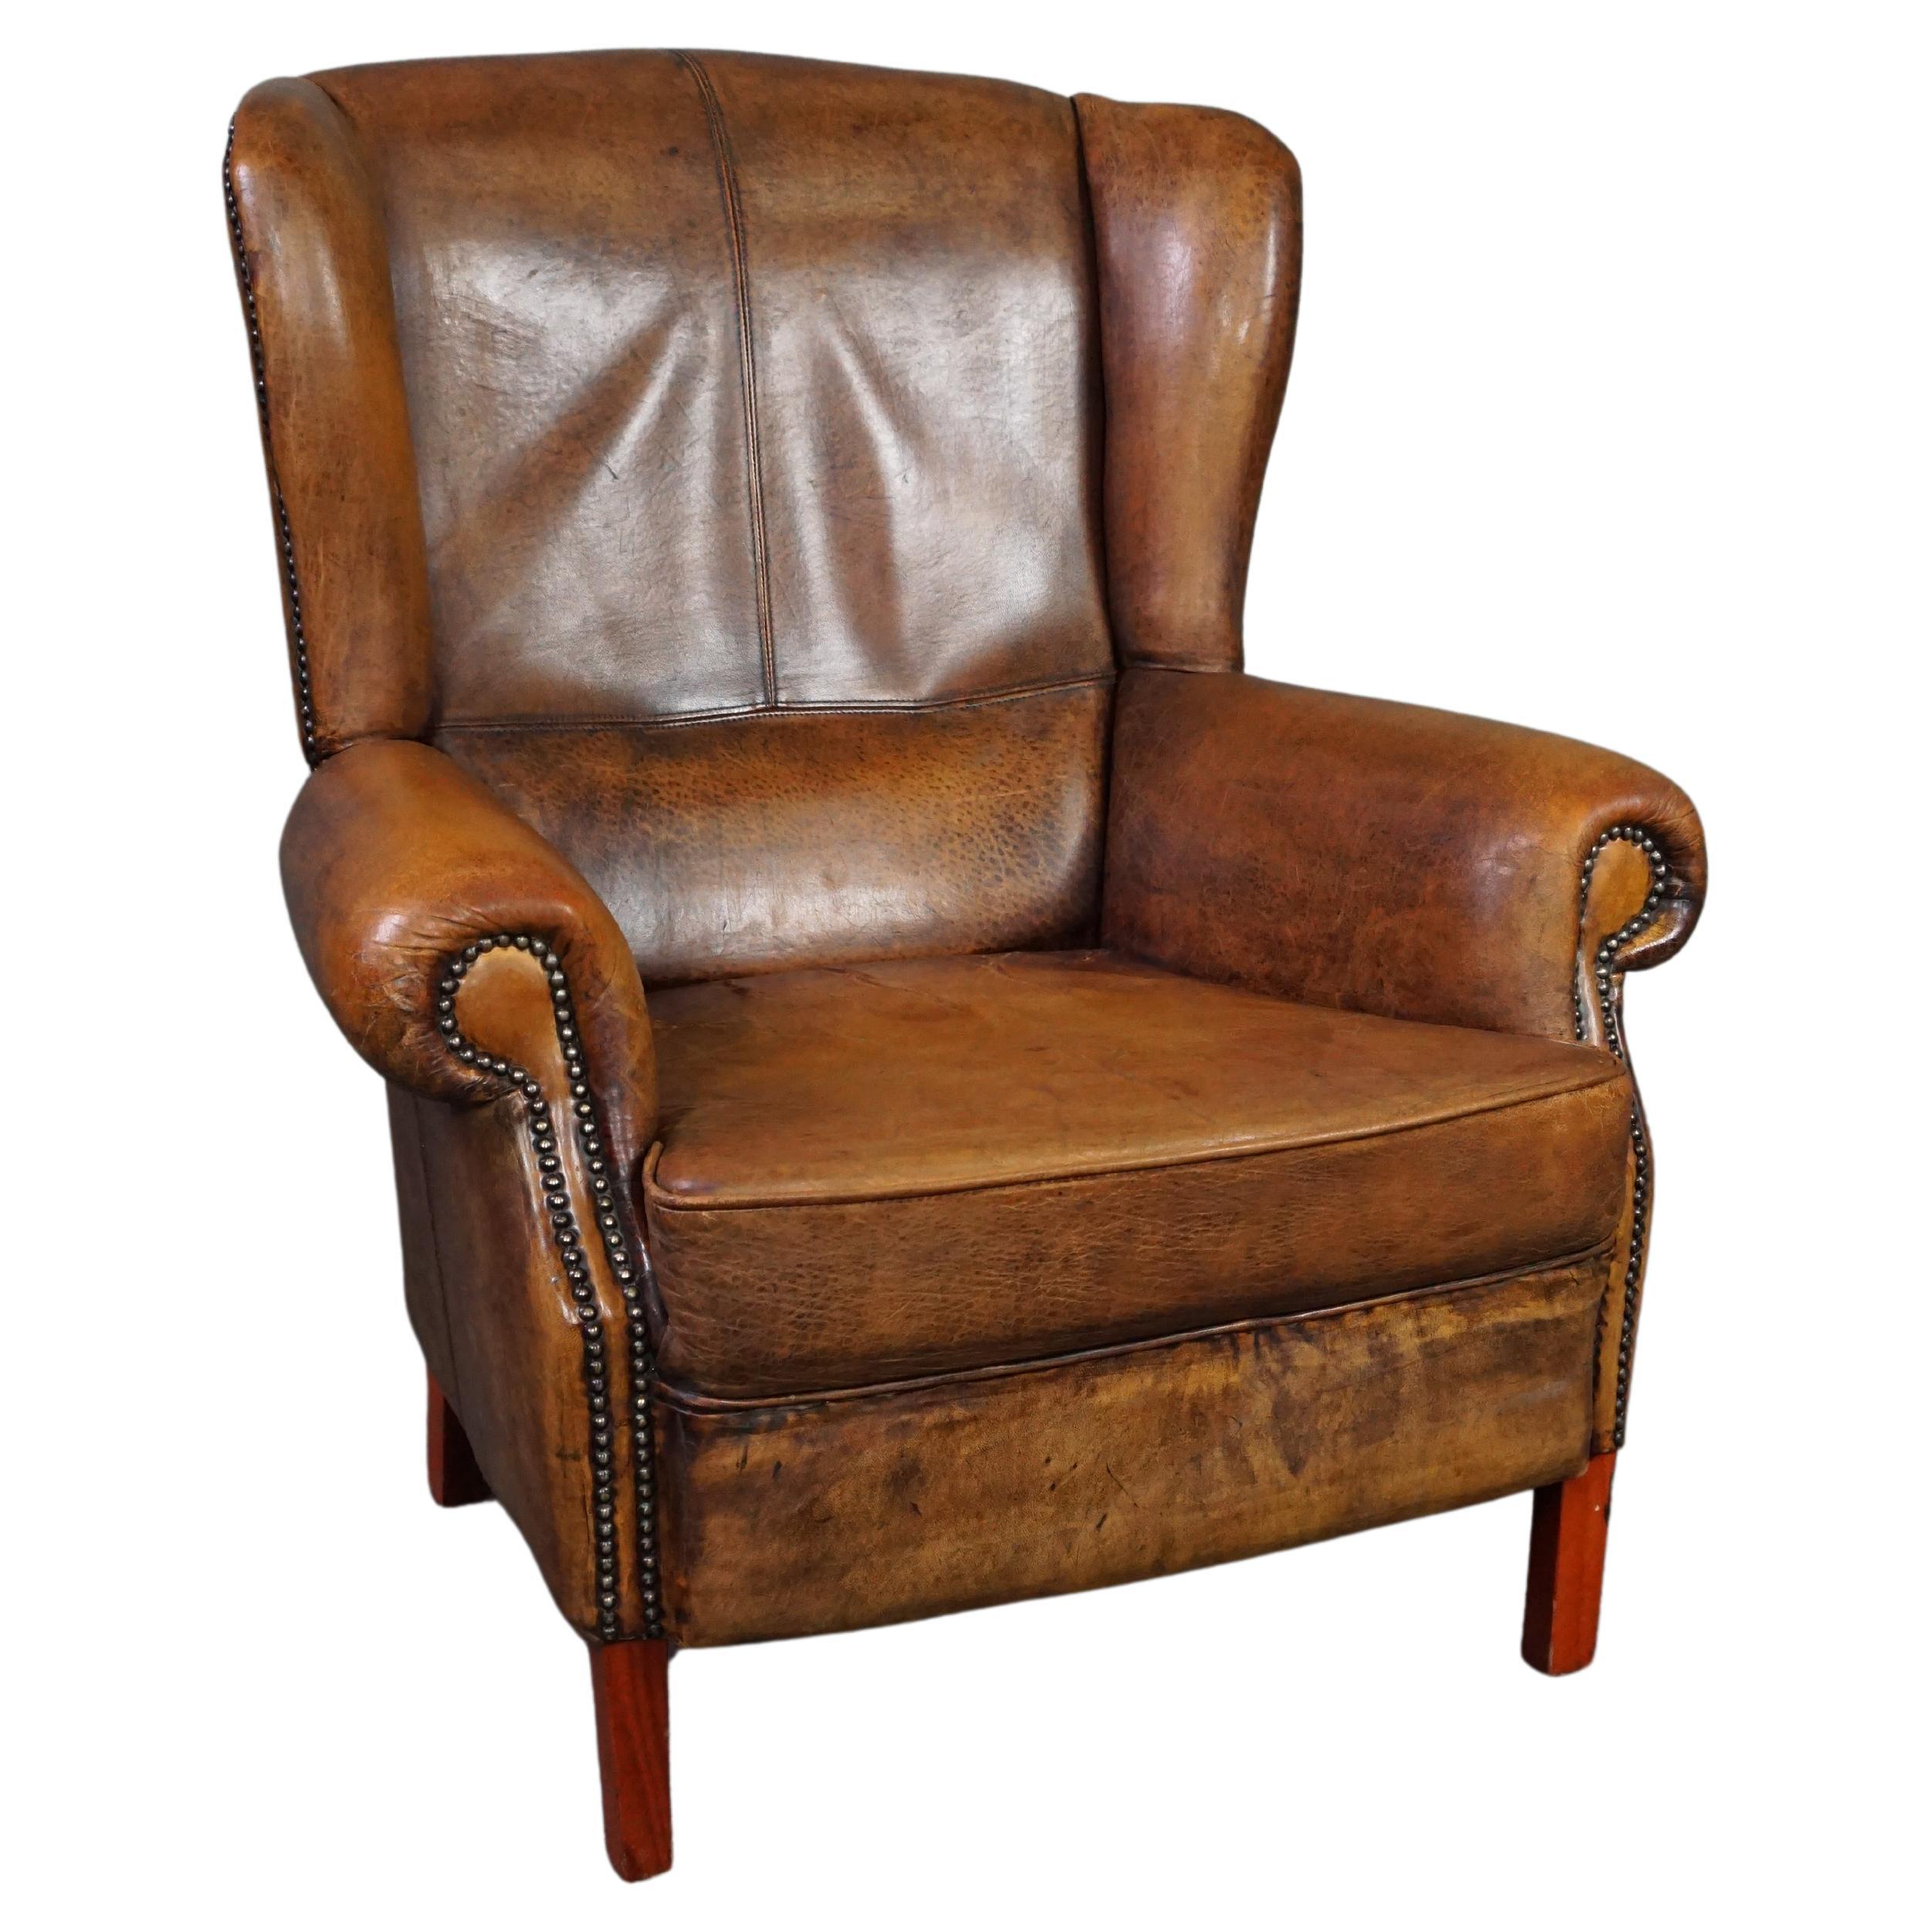 Well-fitting sheepskin leather wing chair For Sale